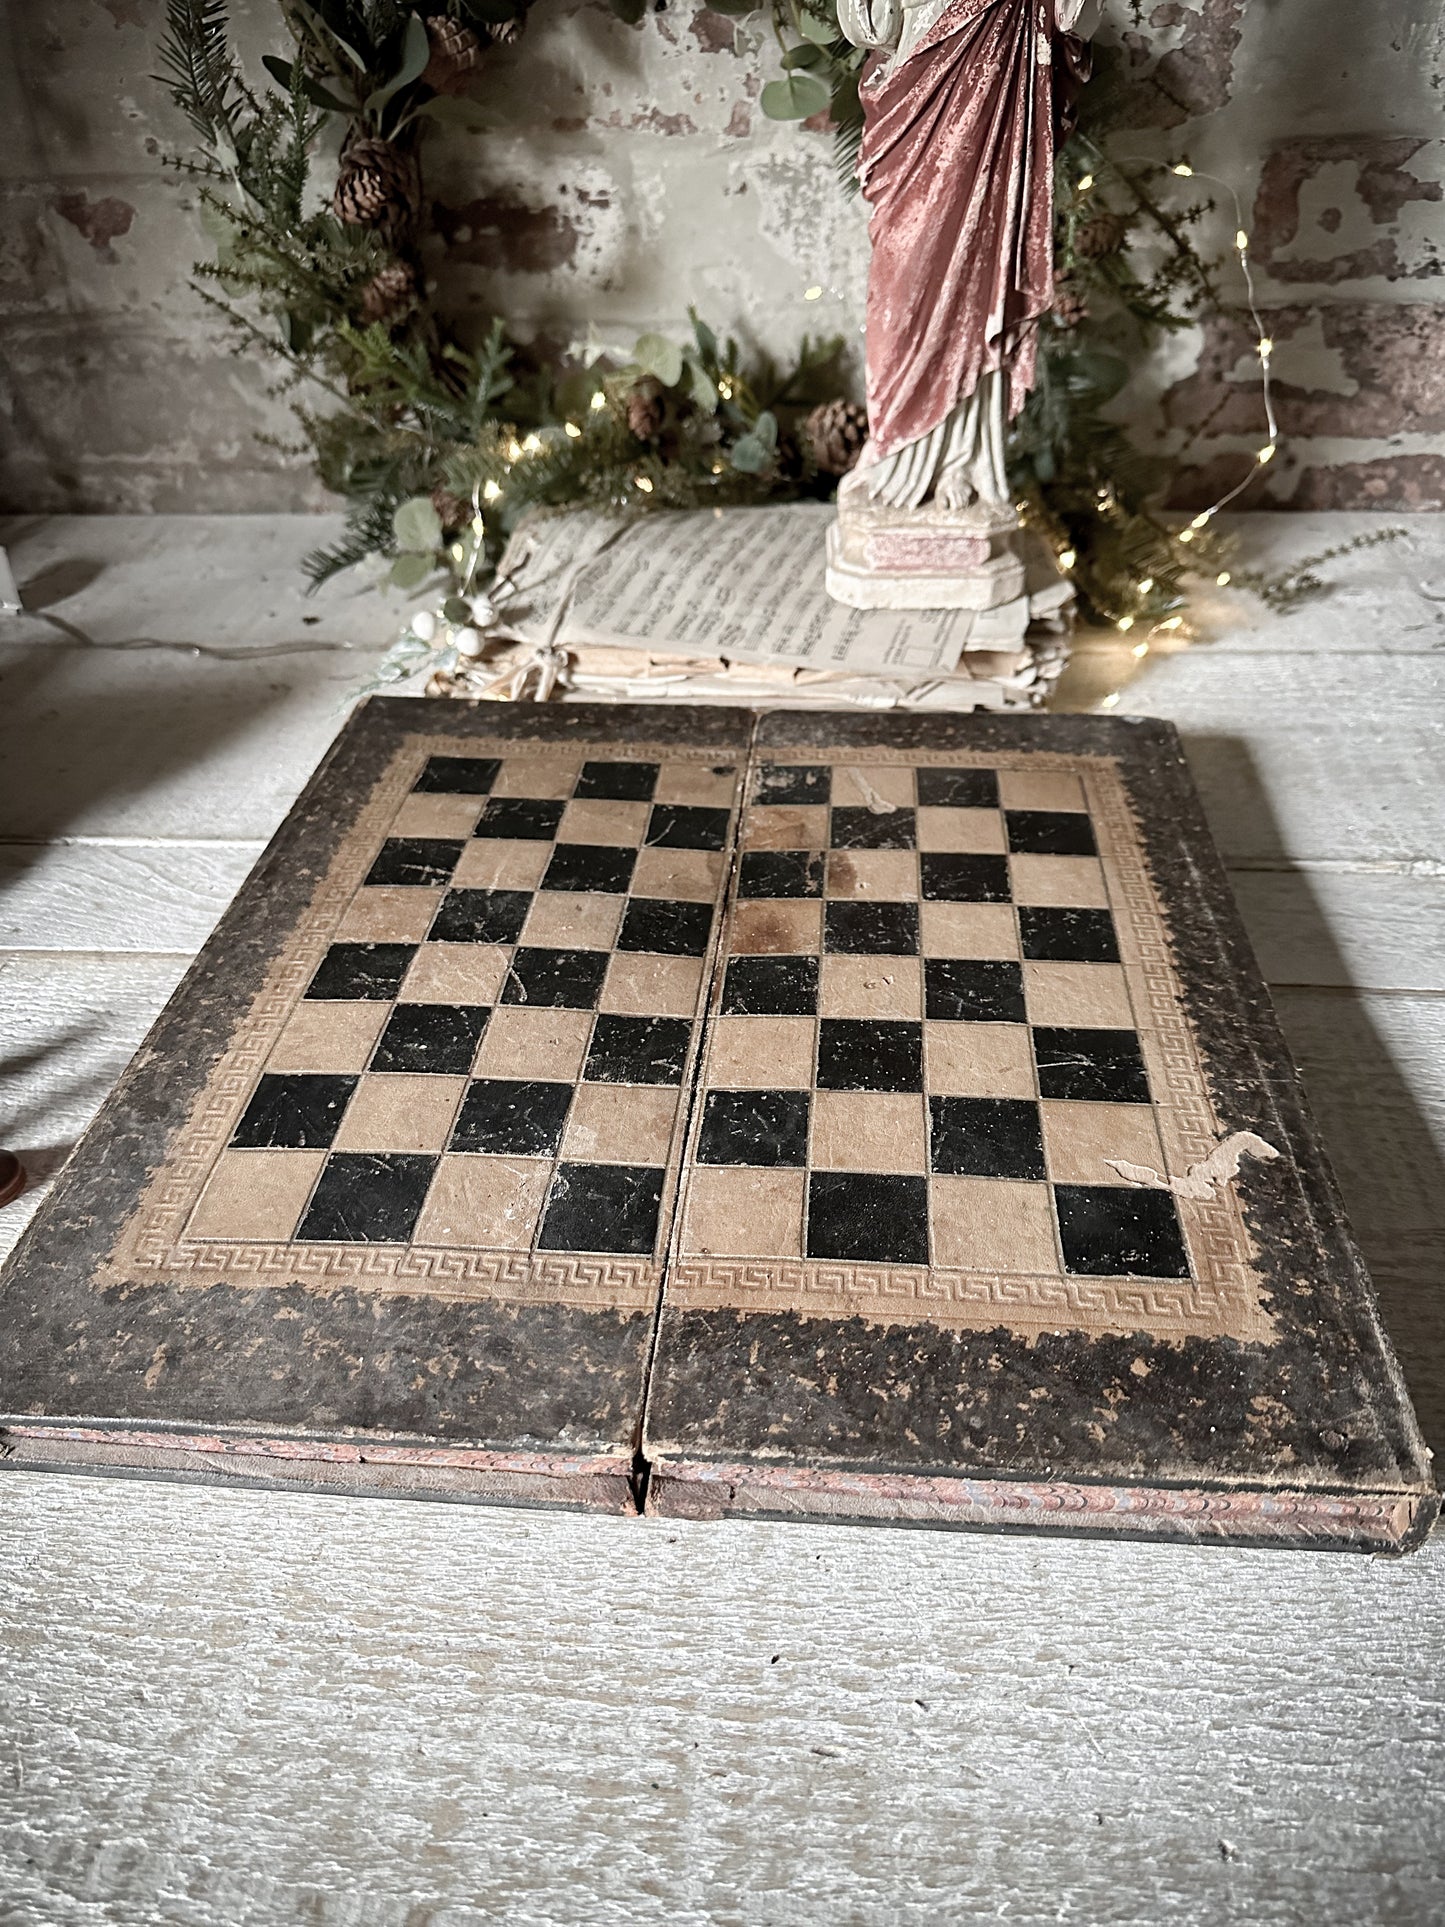 Amazing antique faux English Games book with hidden leather bound backgammon and chess board